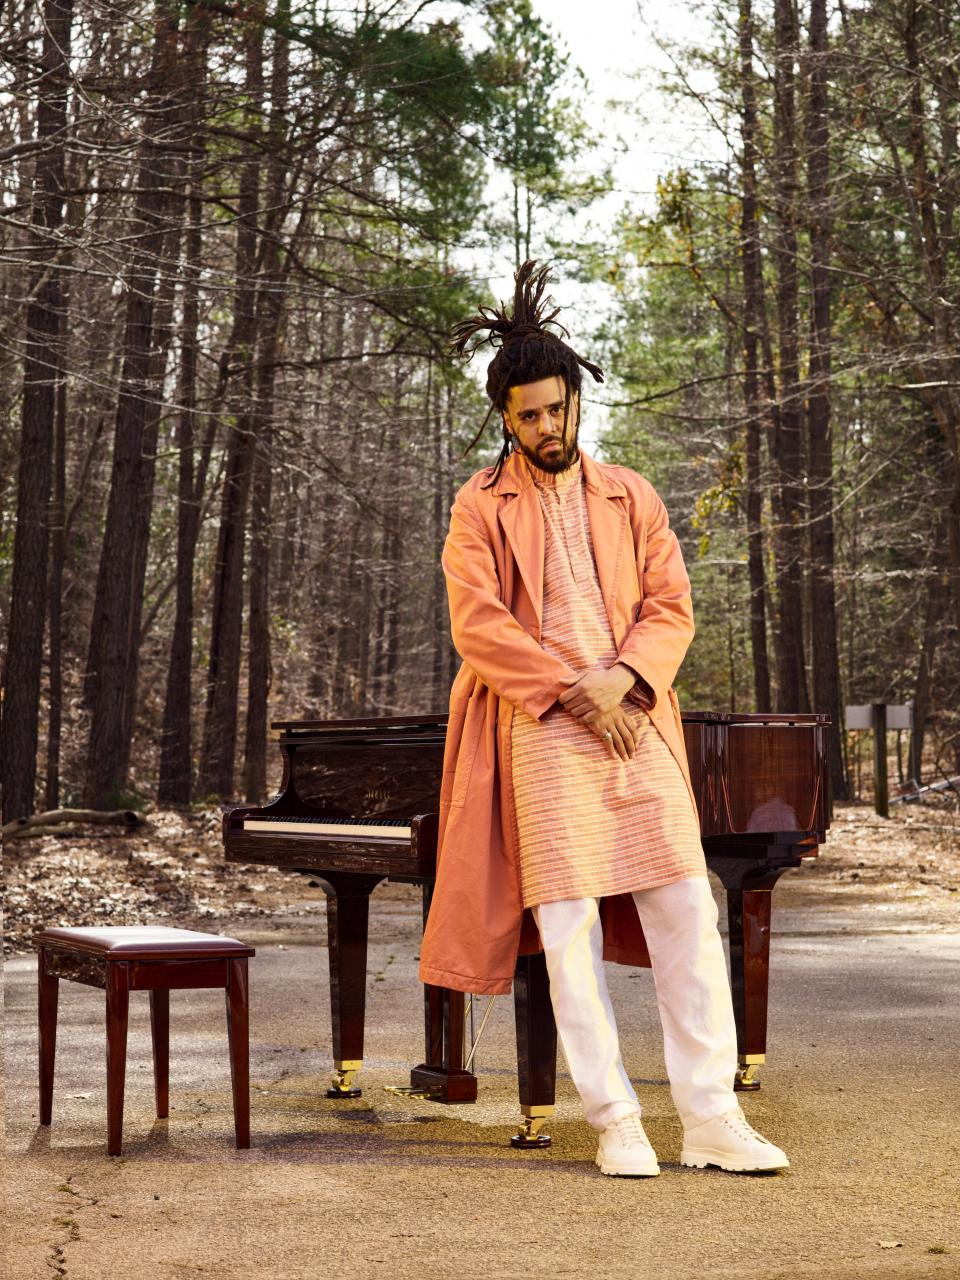 <cite class="credit">Coat, $1,235, by Dries Van Noten / Kurta, $150, and pants, $35, by Vintage India / Sneakers, $150, by Camper / Ring (throughout), stylist's own<br> Yamaha Piano courtesy of Ruggero Piano</cite>